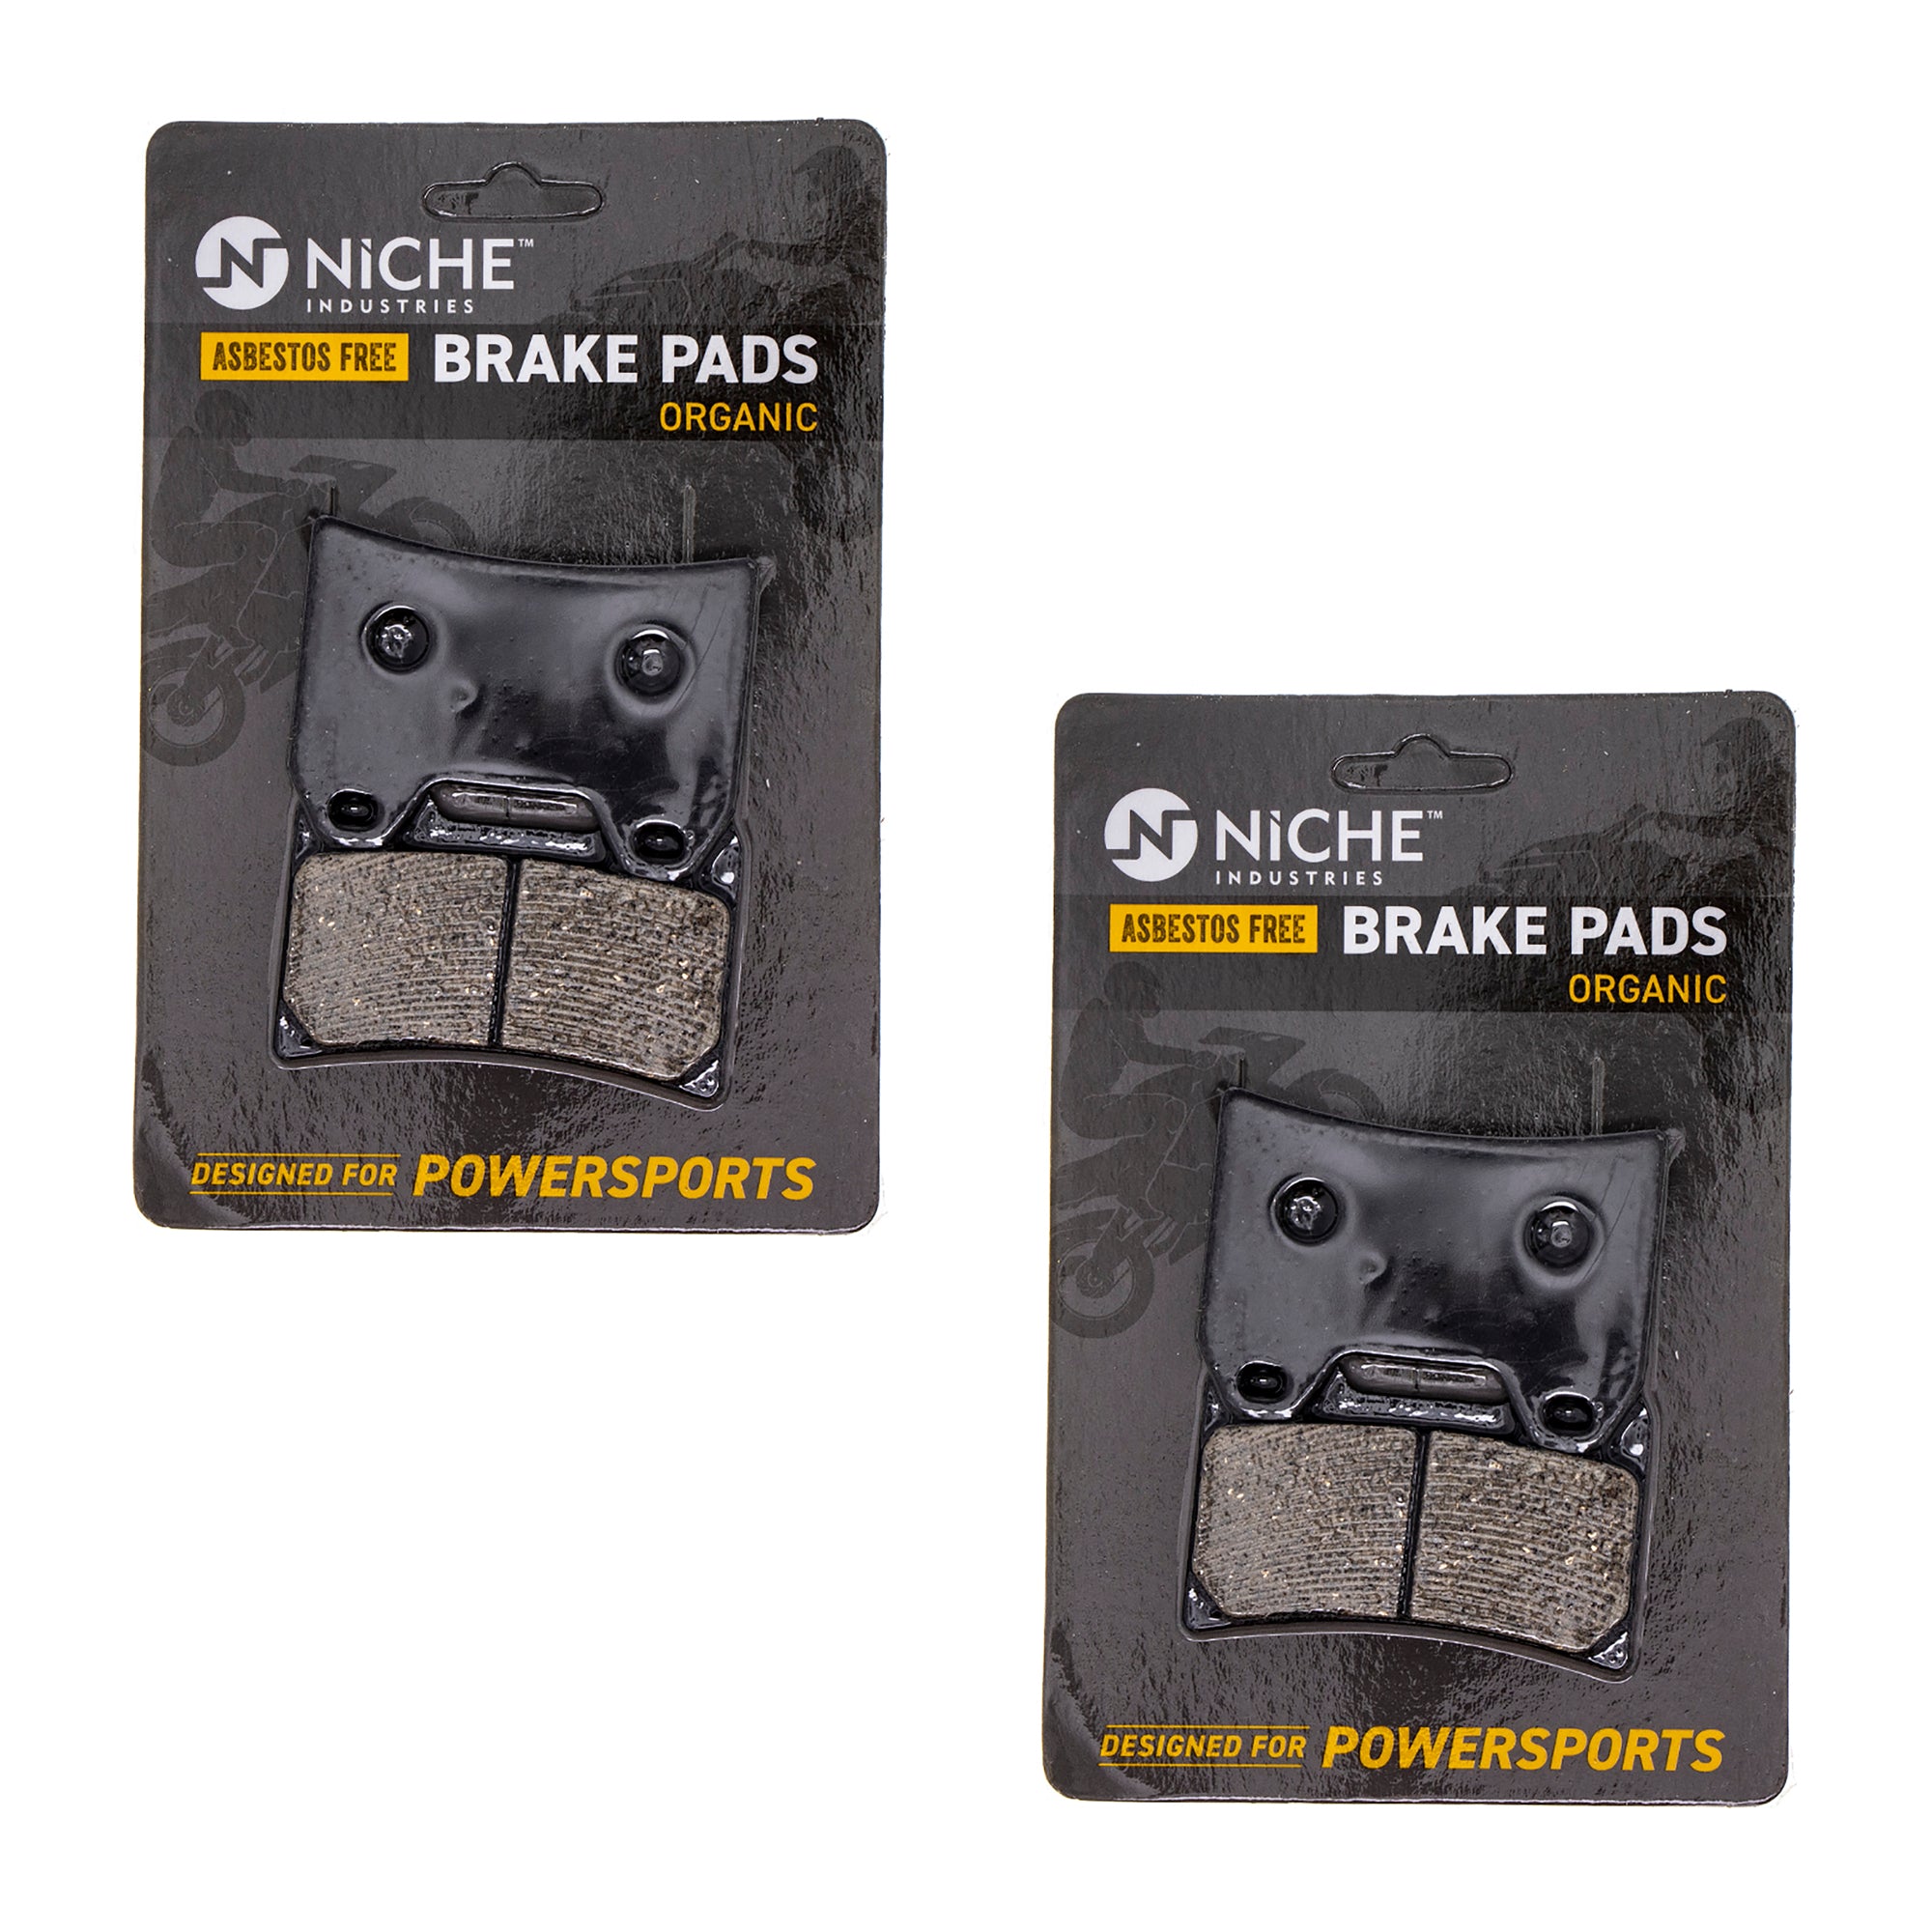 NICHE MK1002789 Brake Pad Kit Front/Rear for zOTHER Monster 998